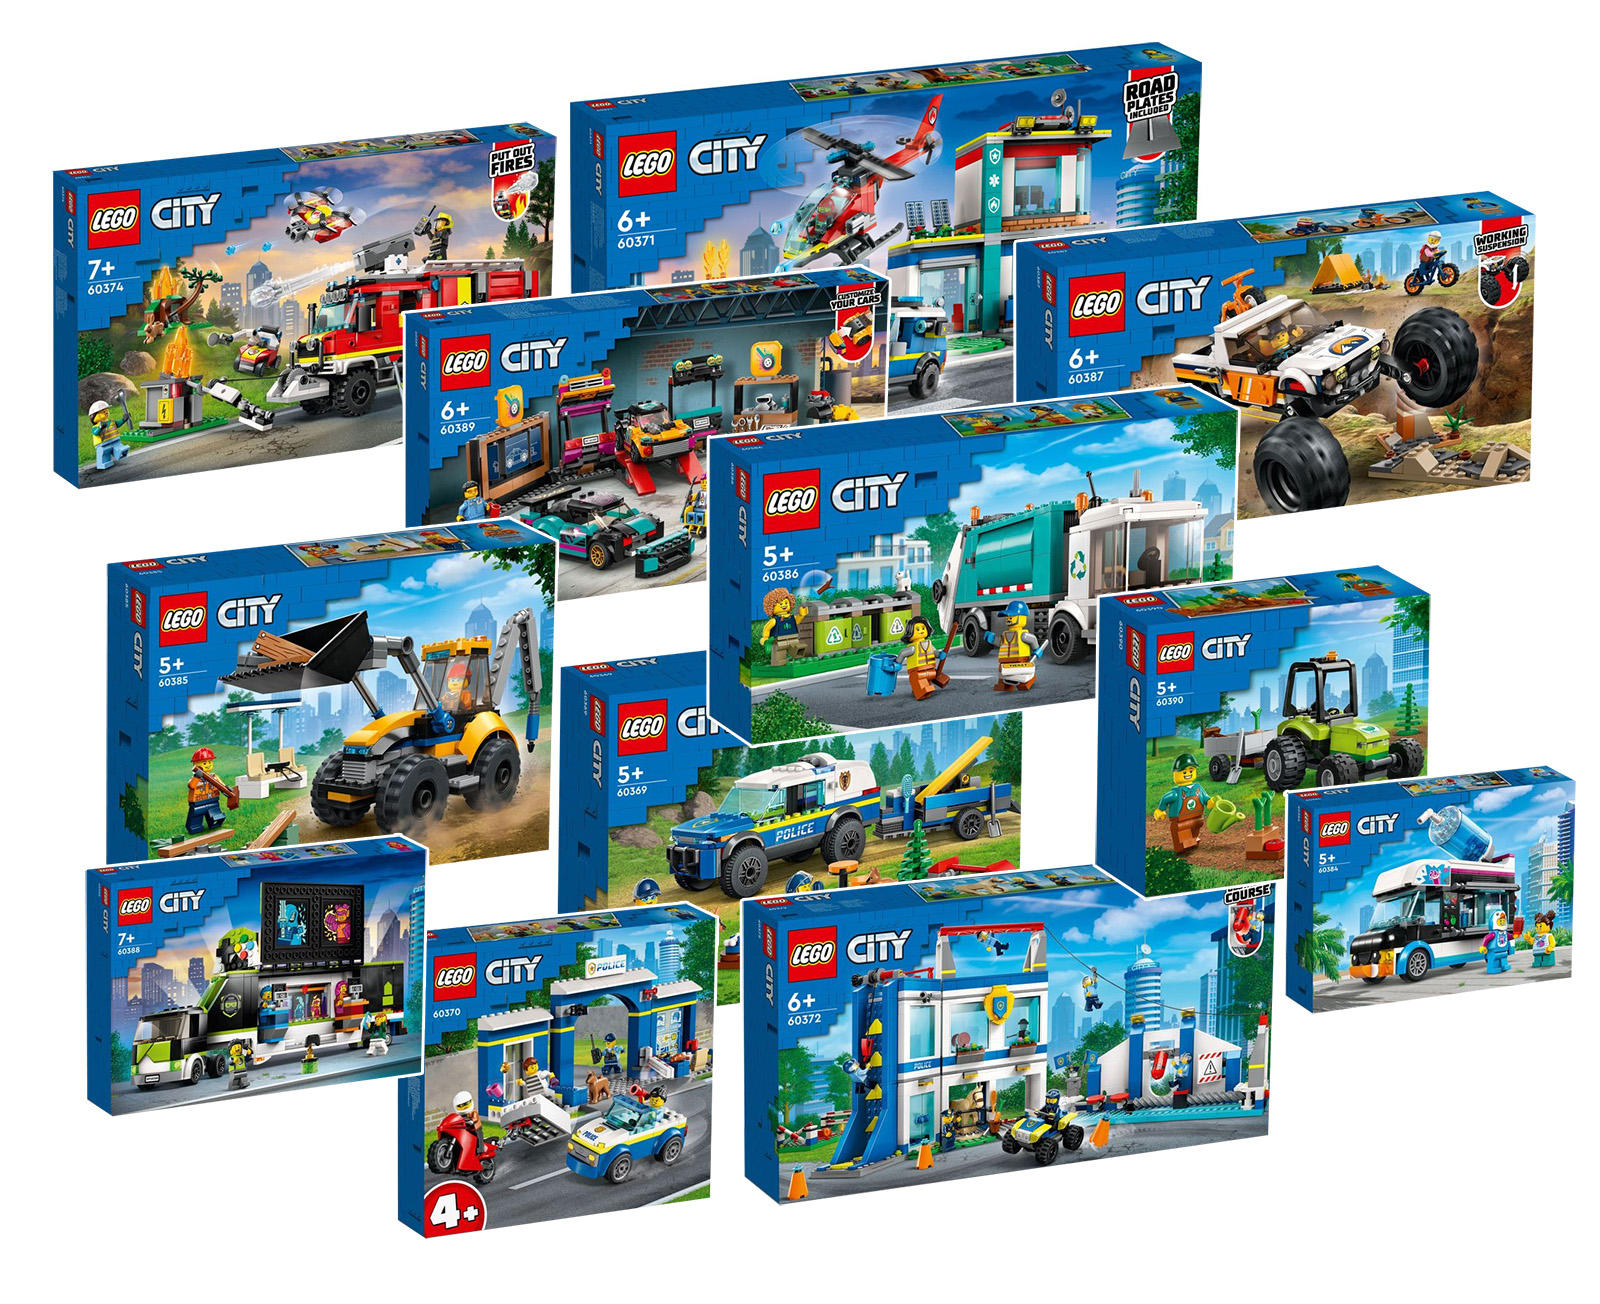 LEGO CITY novelties for the 1st half of 2023: the official visuals are available